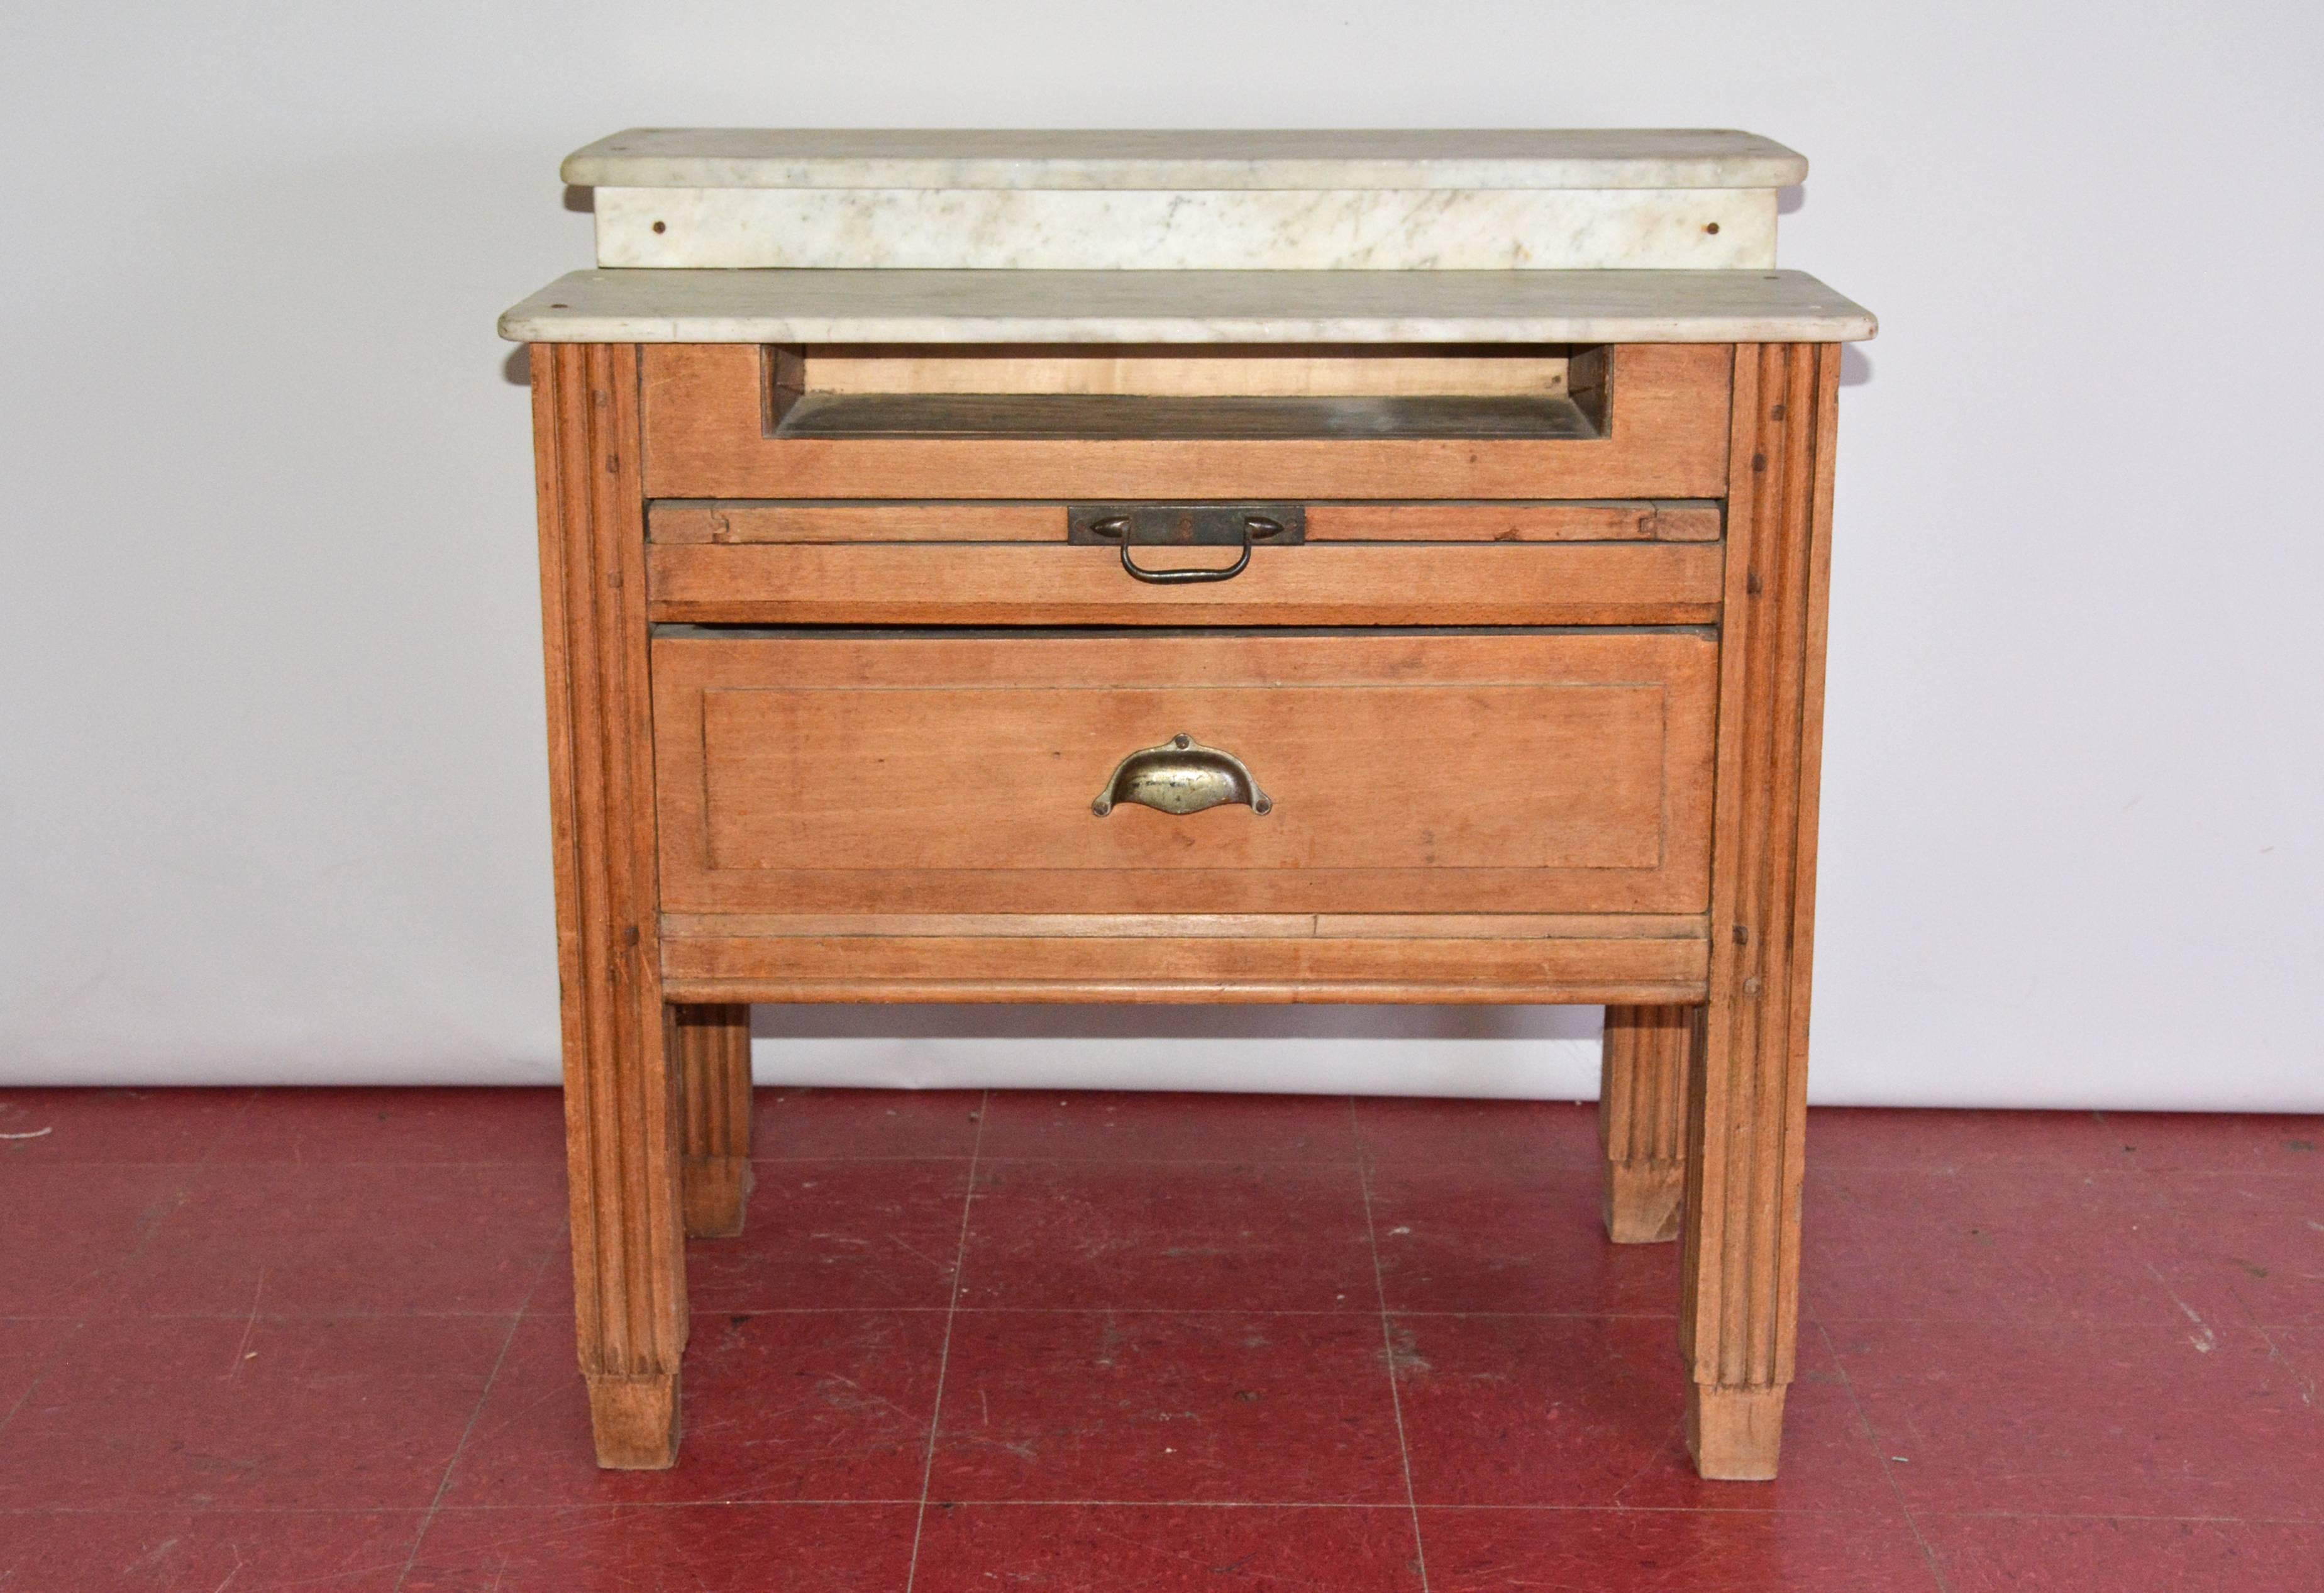 Wonderful antique French baker's wrapping table has a two-level marble top, a shelf underneath the top, a pull-out cutting board and a drawer. Marble top has great antiqued patina giving this table lots of character. The pulls are iron. The square